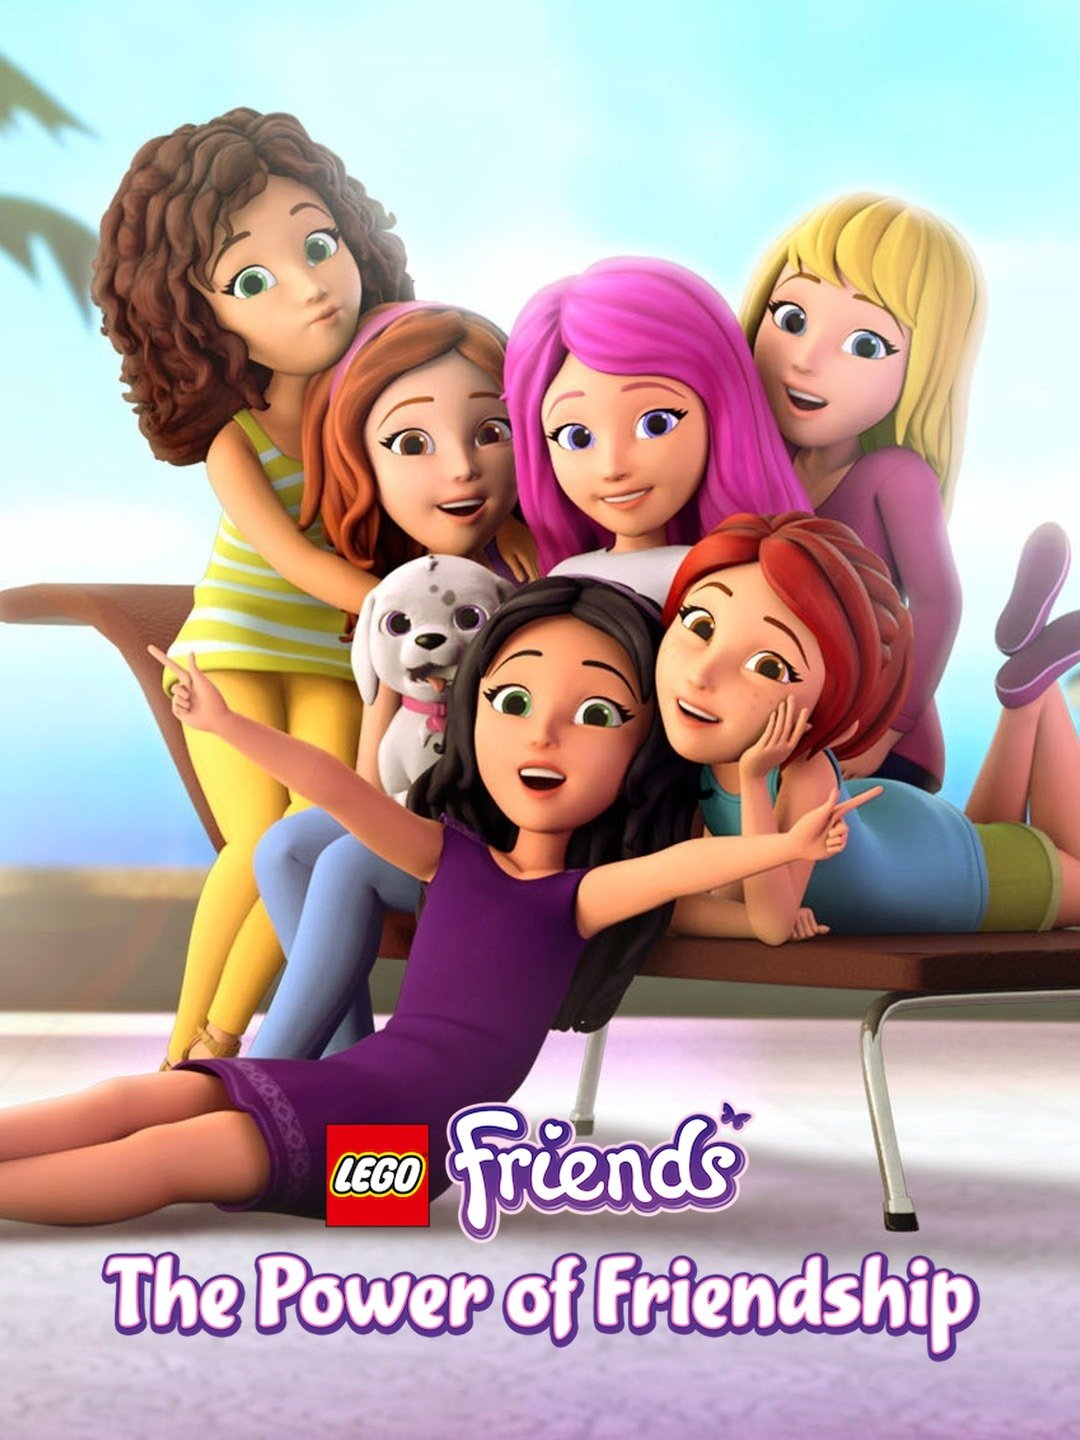 LEGO Friends: The Power of Friendship - Rotten Tomatoes